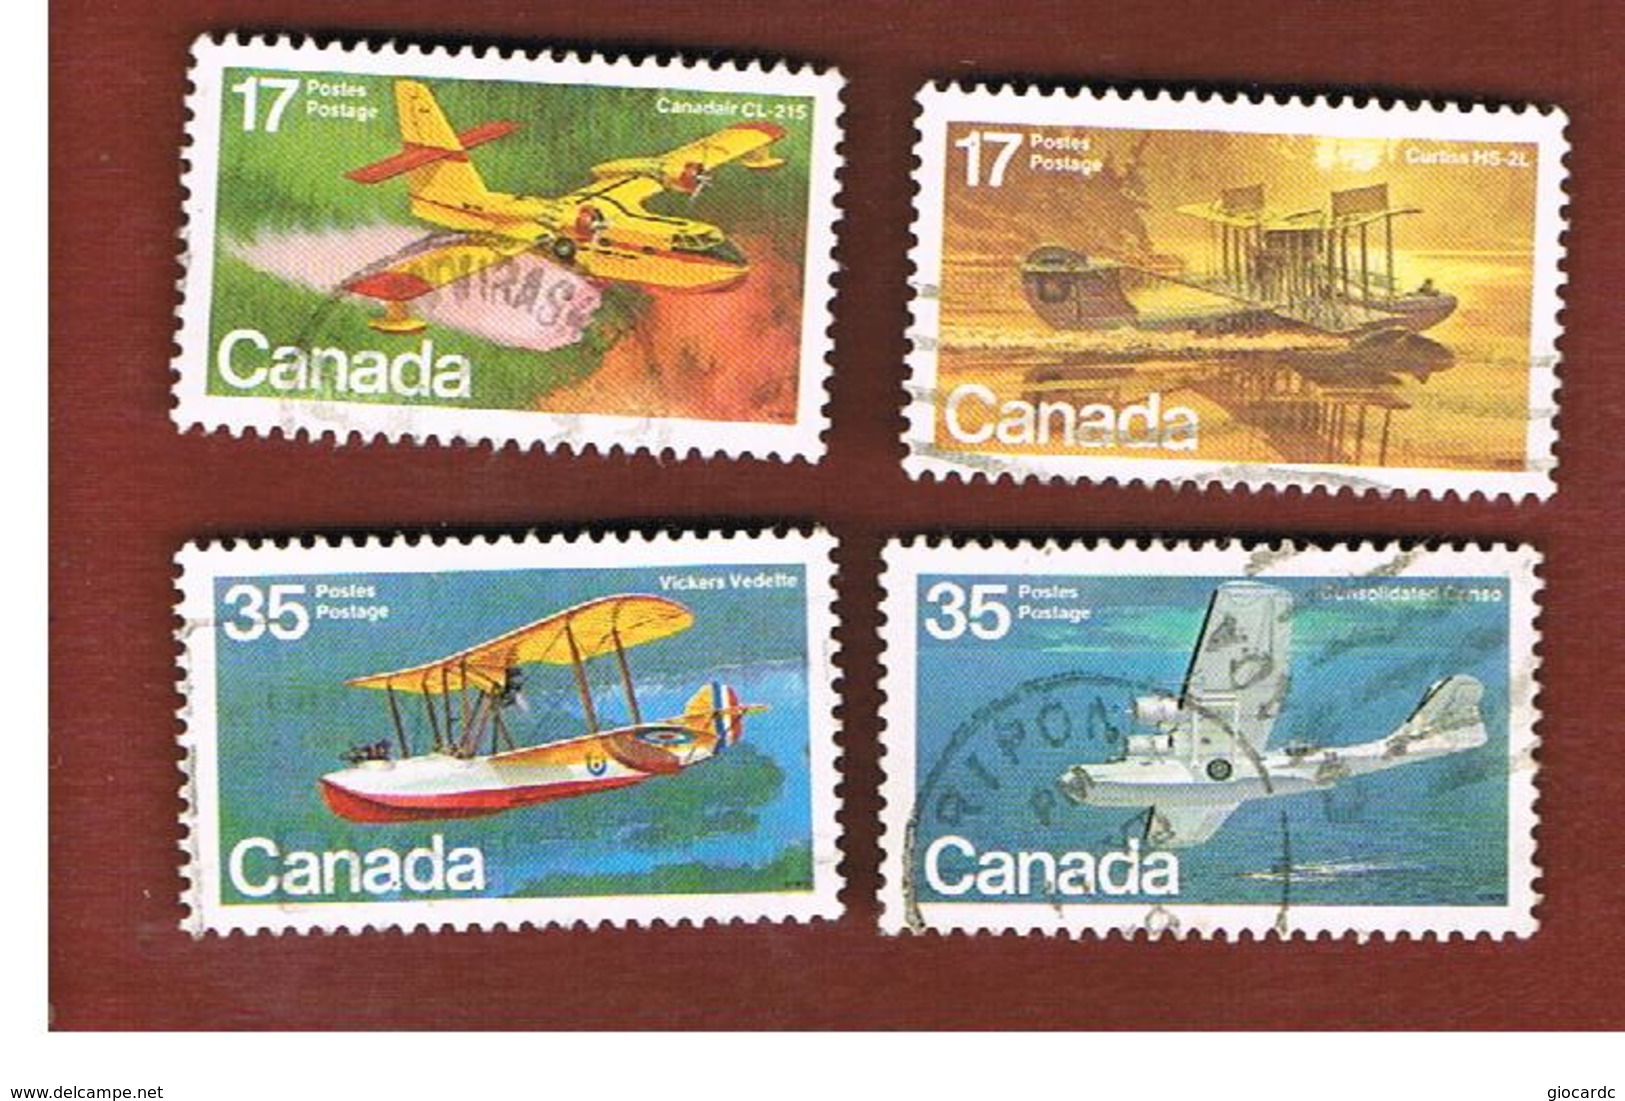 CANADA - SG 966.969    - 1979 AIRPLANES:  COMPLET SET OF 4            -  USED - Oblitérés